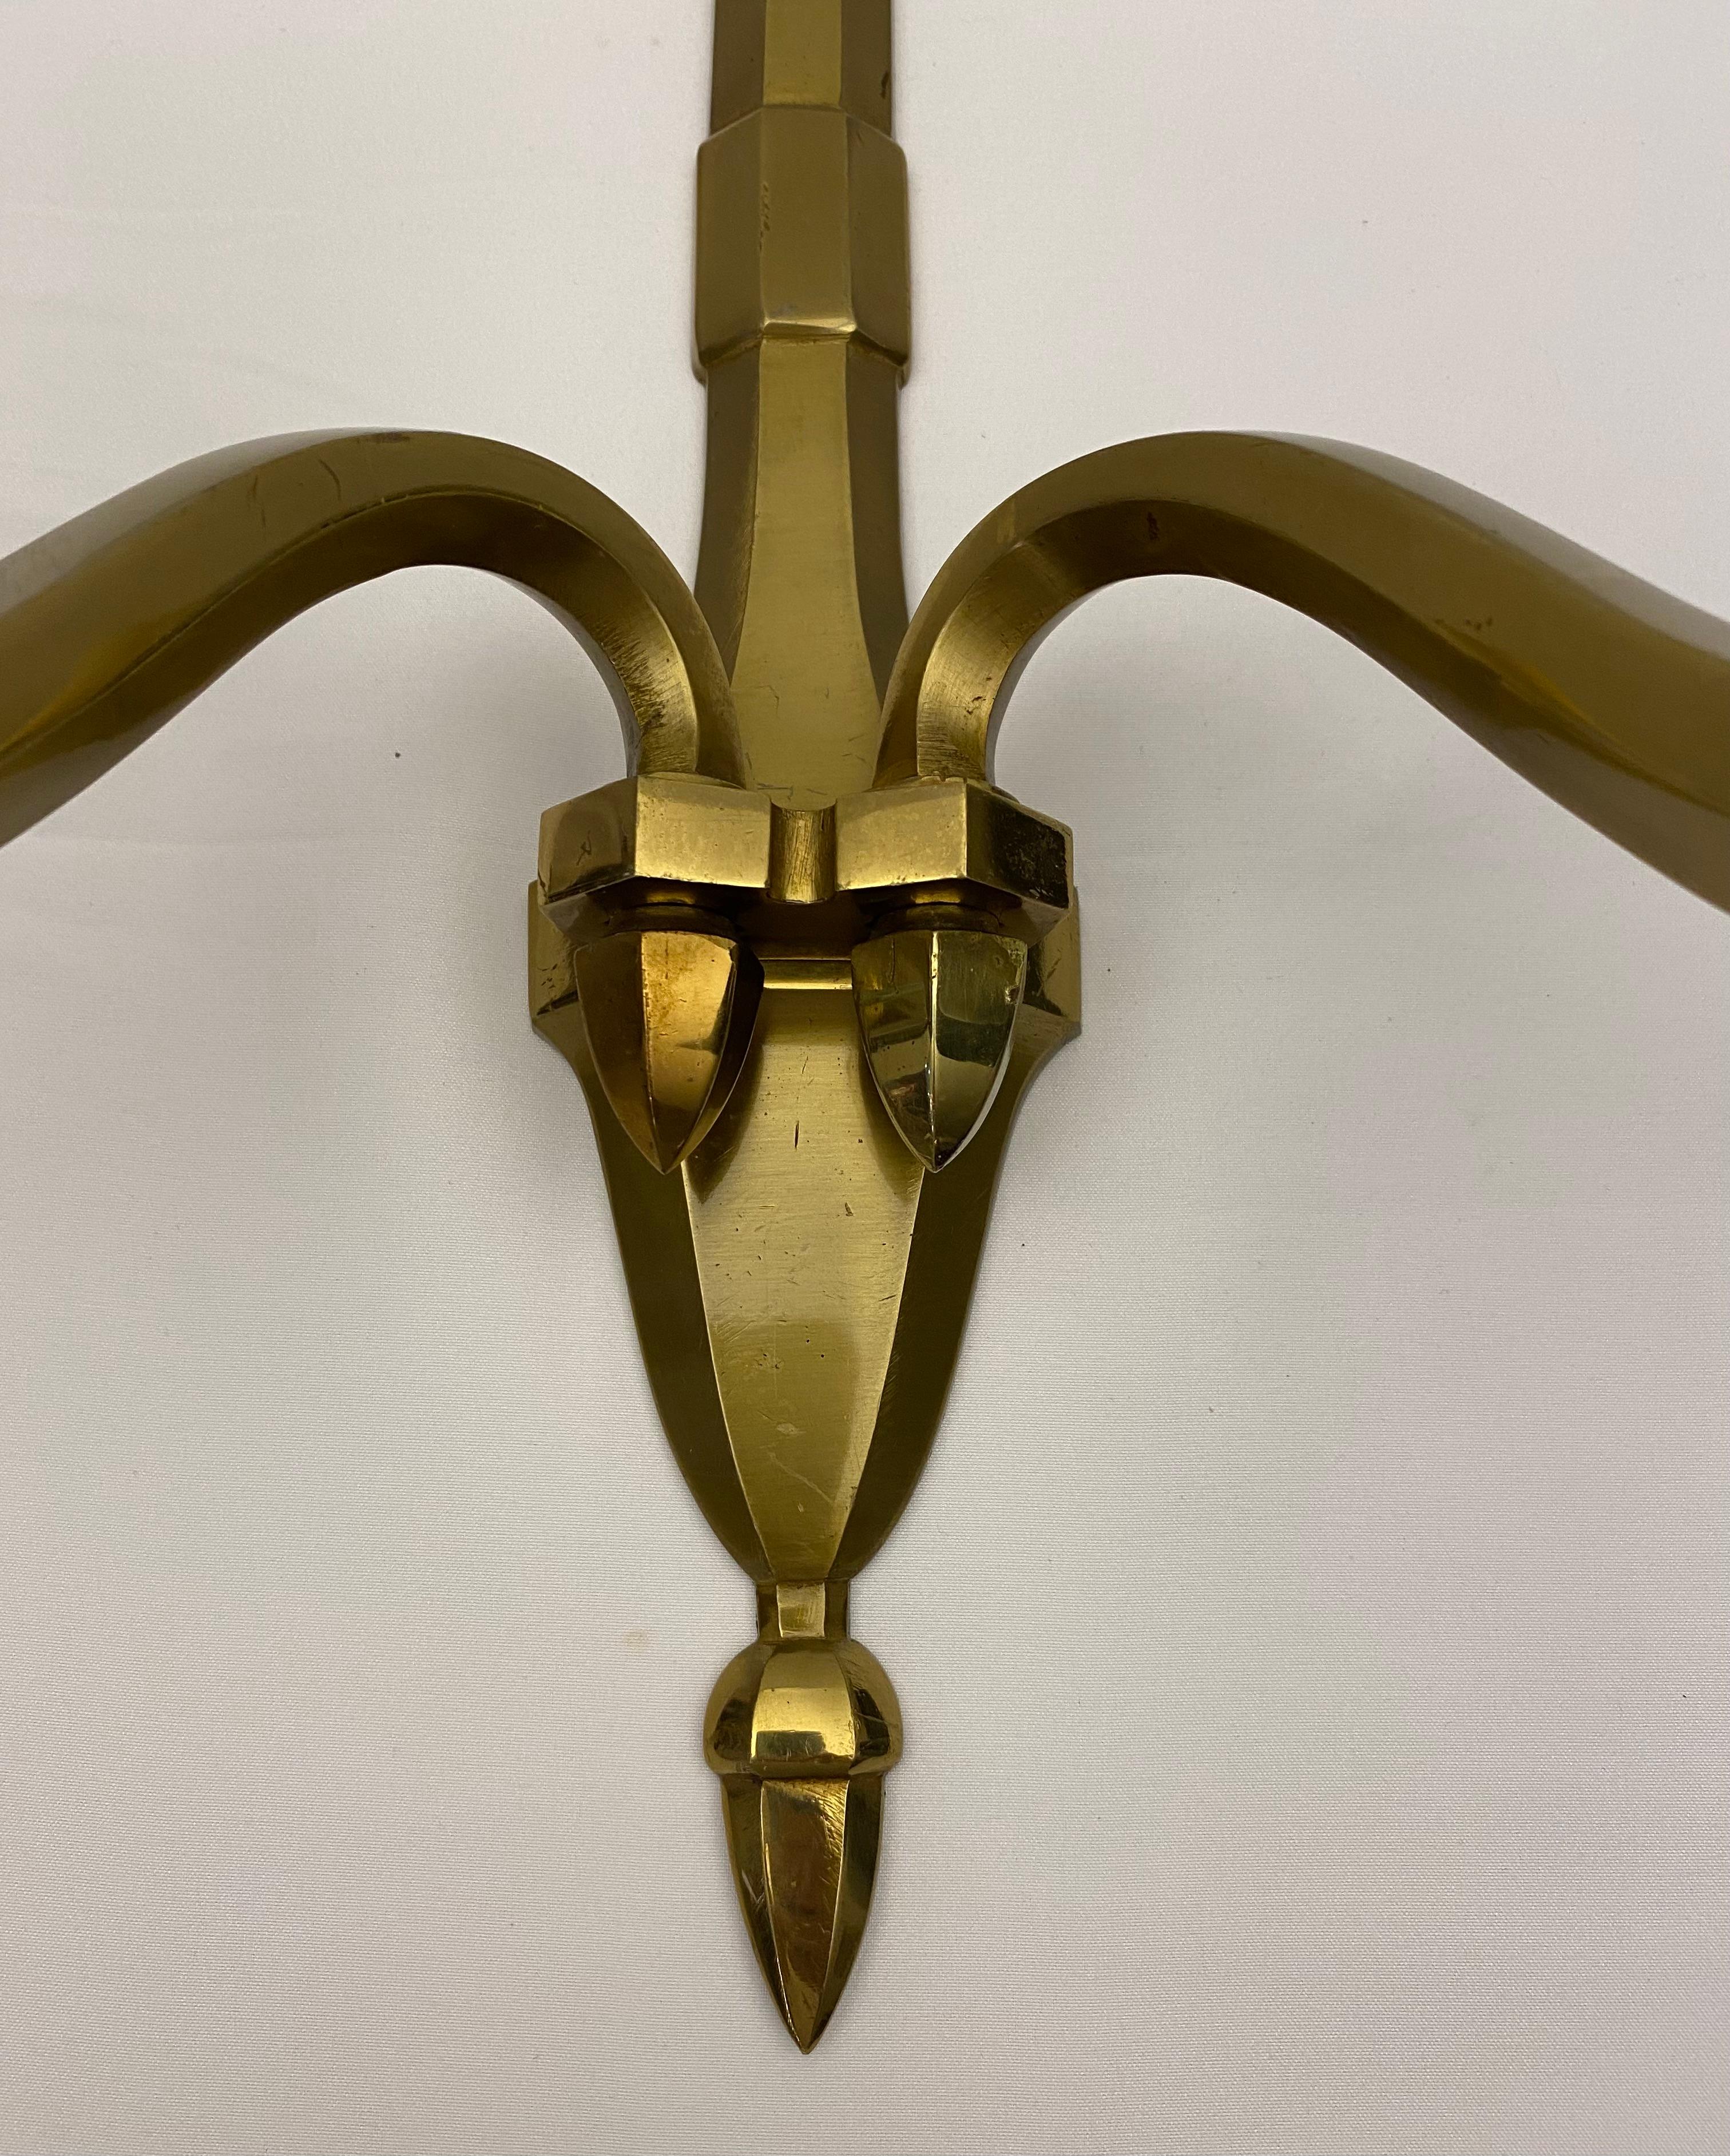 A very good quality Pair of French Mid-Century (1940's) bronze wall sconces with two scroll and cornucopia design arms with a round glass bobeche and supported by a gorgeous shaped backplate. These beautiful wall sconces are in the style of Jean